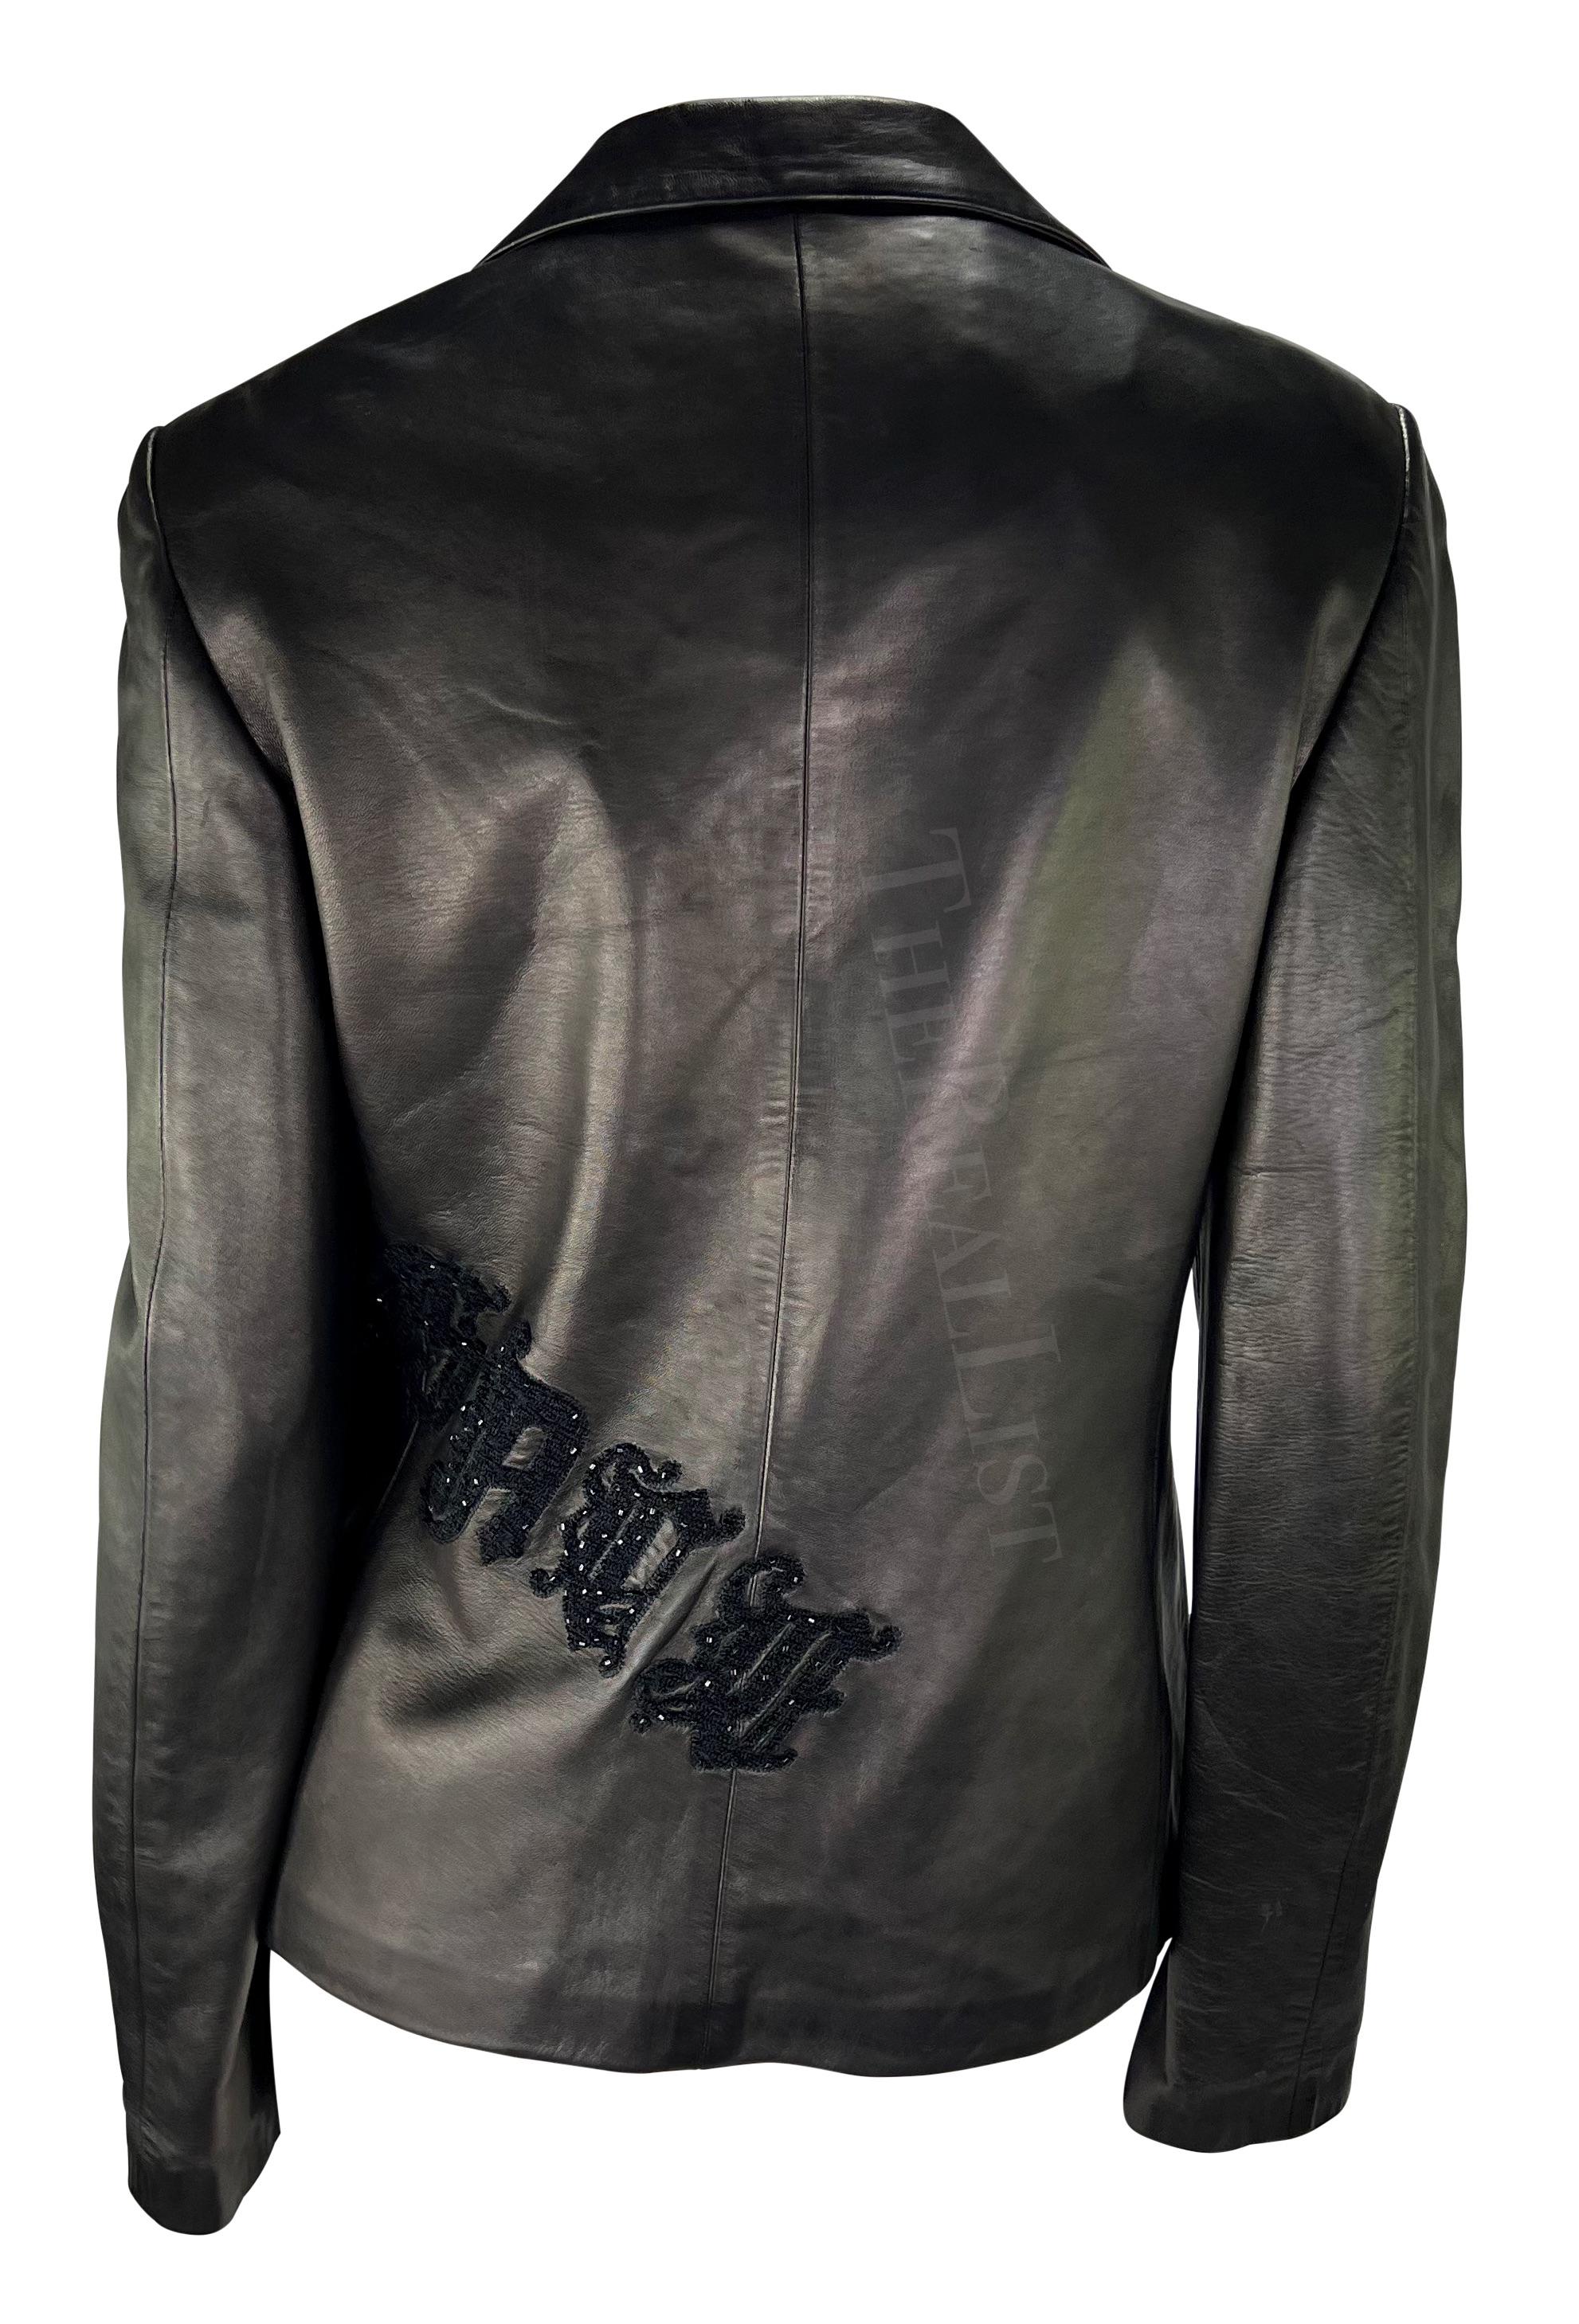 F/W 1999 Gianni Versace by Donatella Logo Embroidered Black Leather Jacket For Sale 1